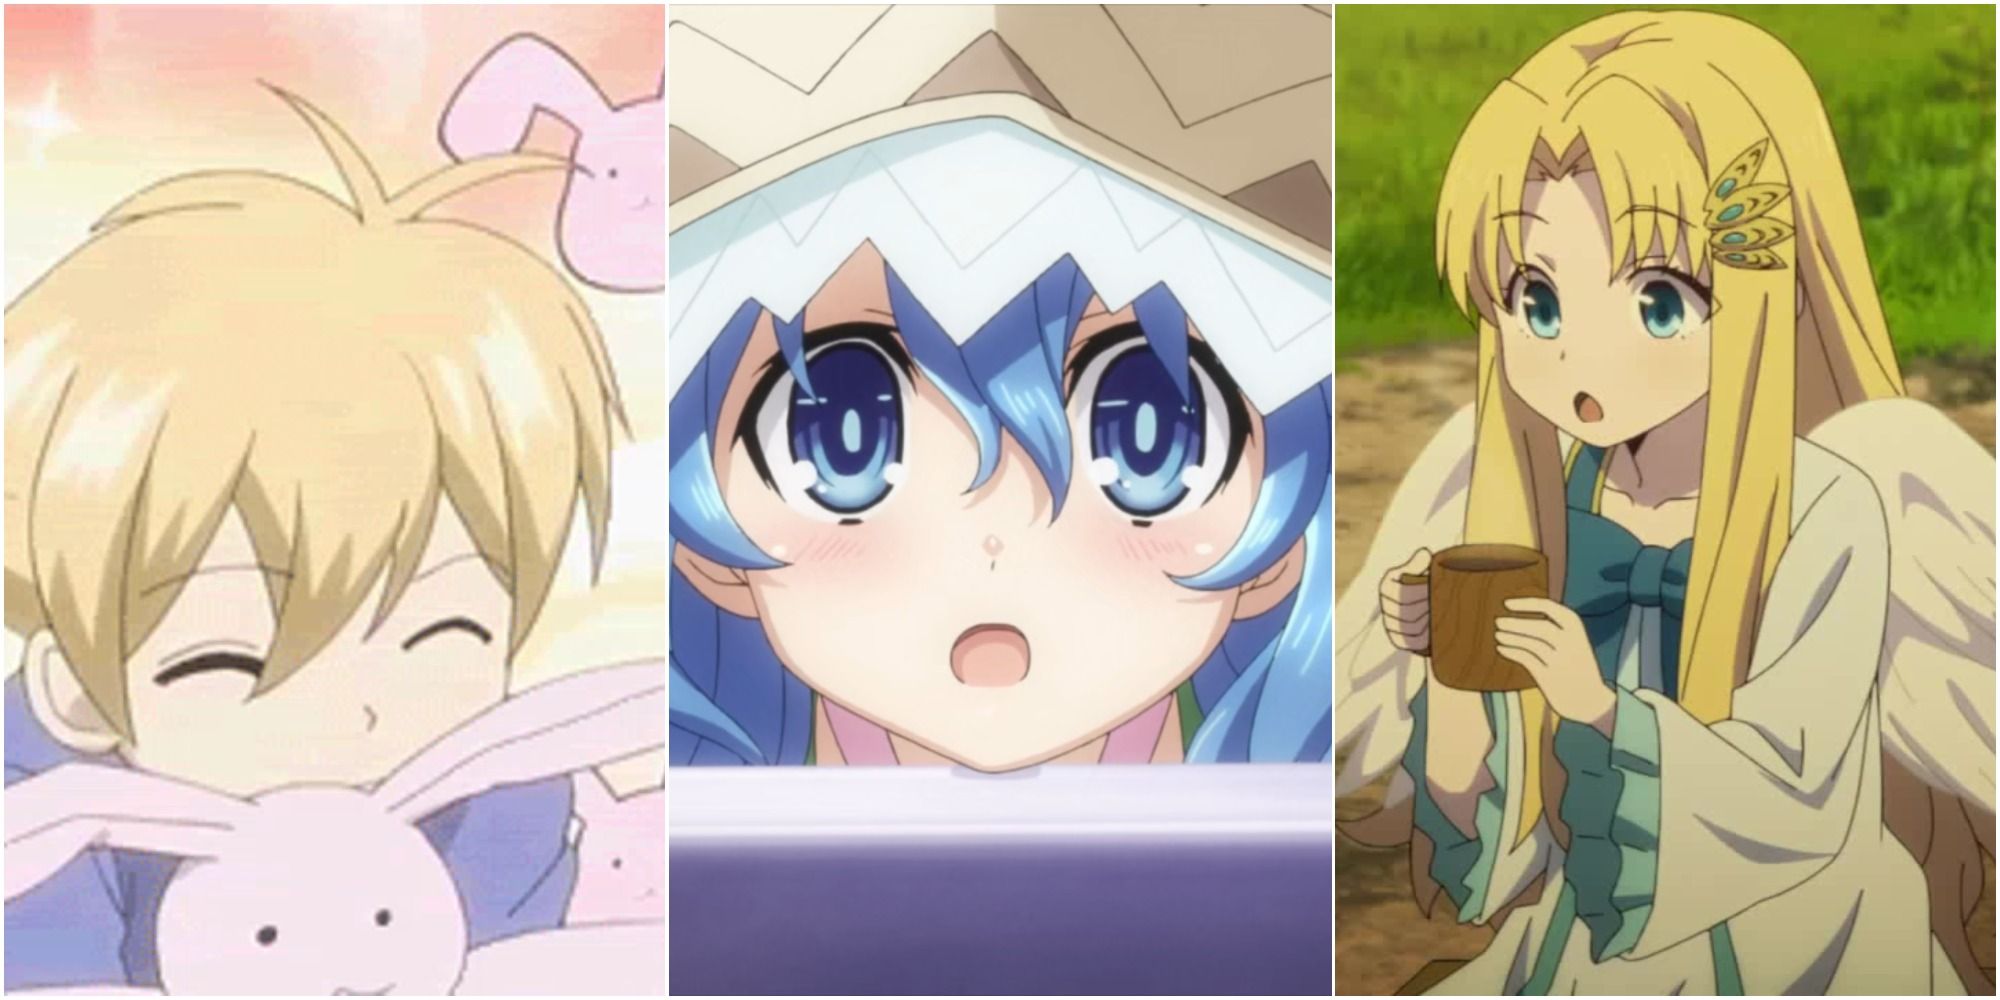 Cutesy Anime Characters Feature Image With Honey From Ouran Yoshino From Date A Live And Filo From The Rising Of The Shield Hero